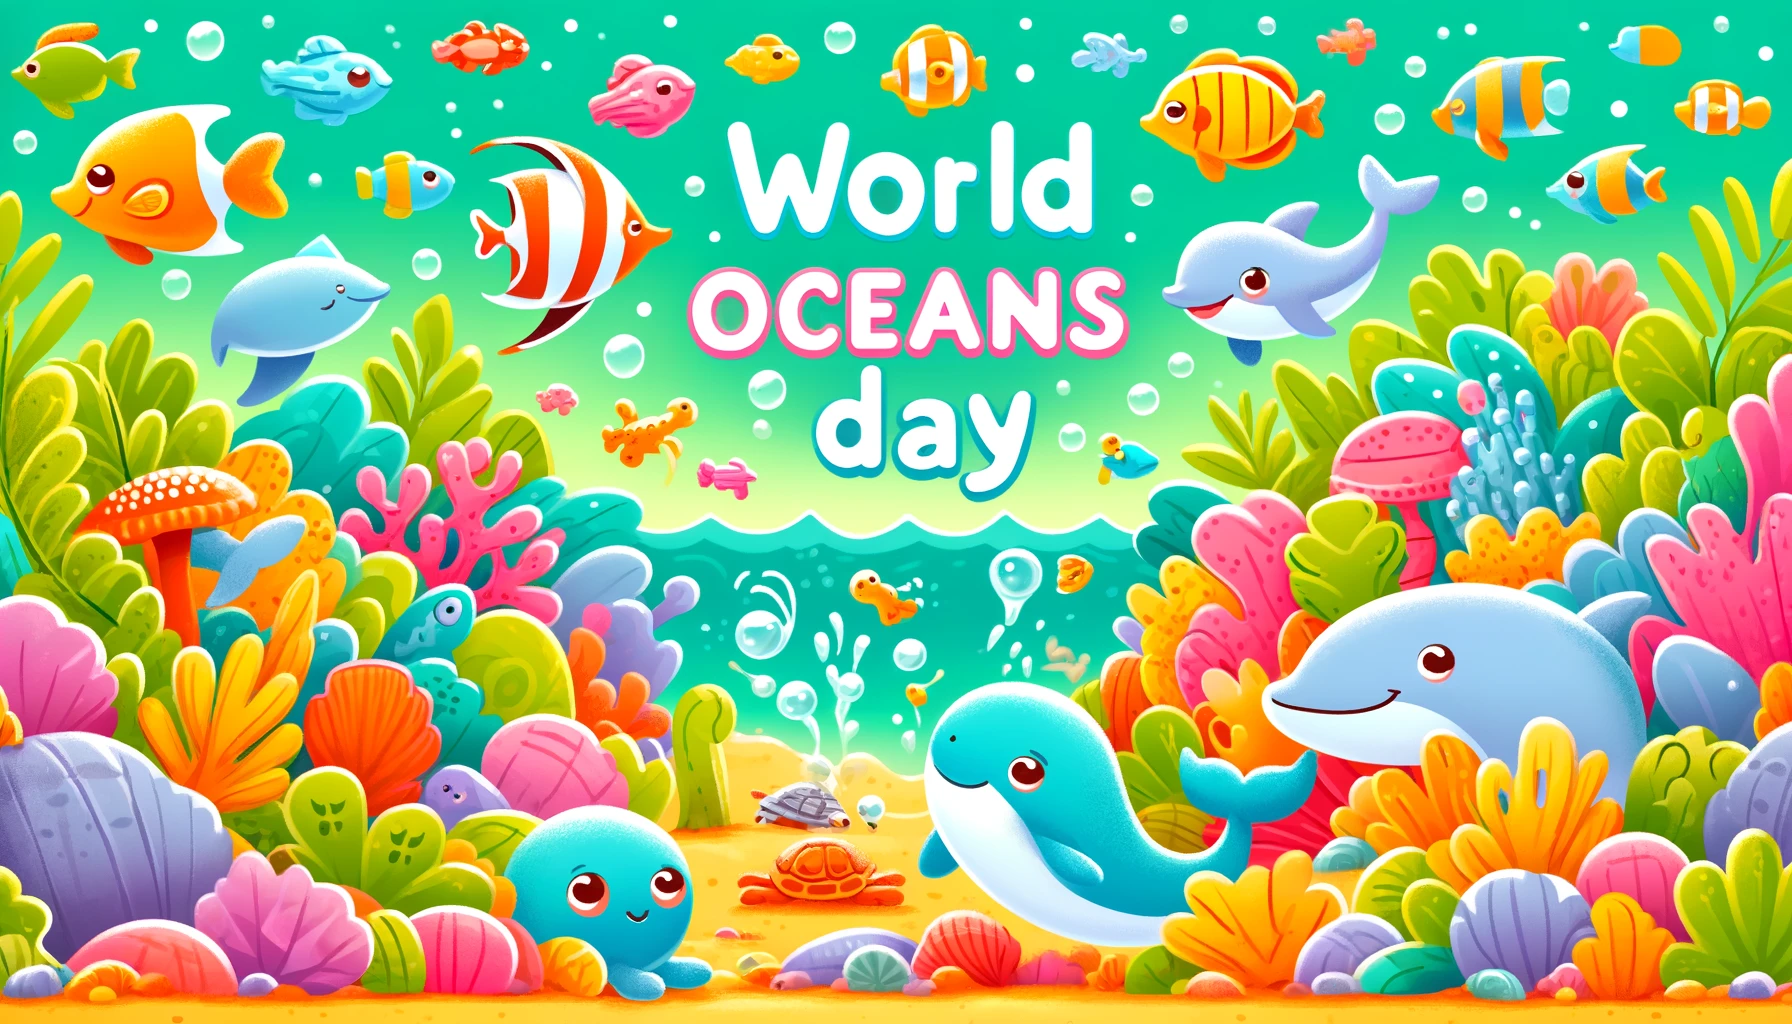 World Oceans Day: Inspiring Quotes to Protect Our Seas